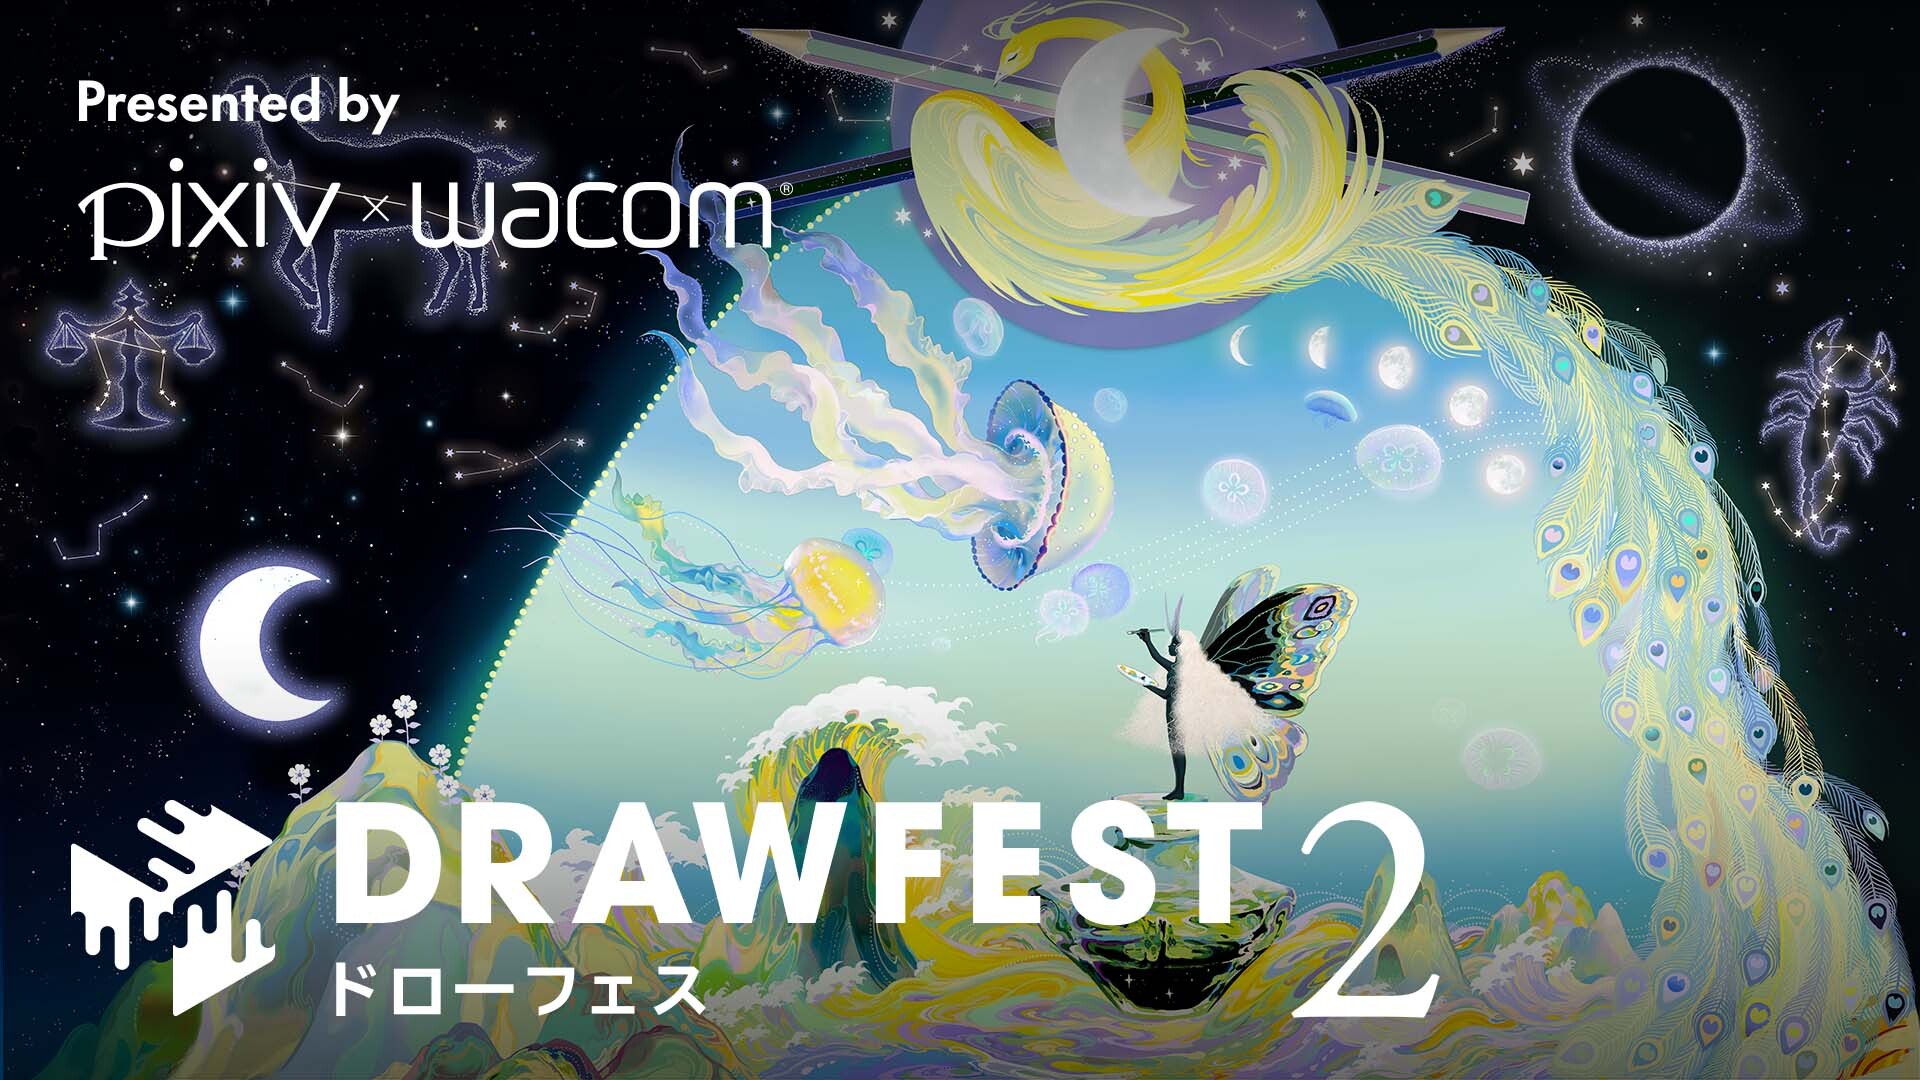 Celsys to sponsor Drawfest 2, a joint pixiv and Wacom online learning and art event